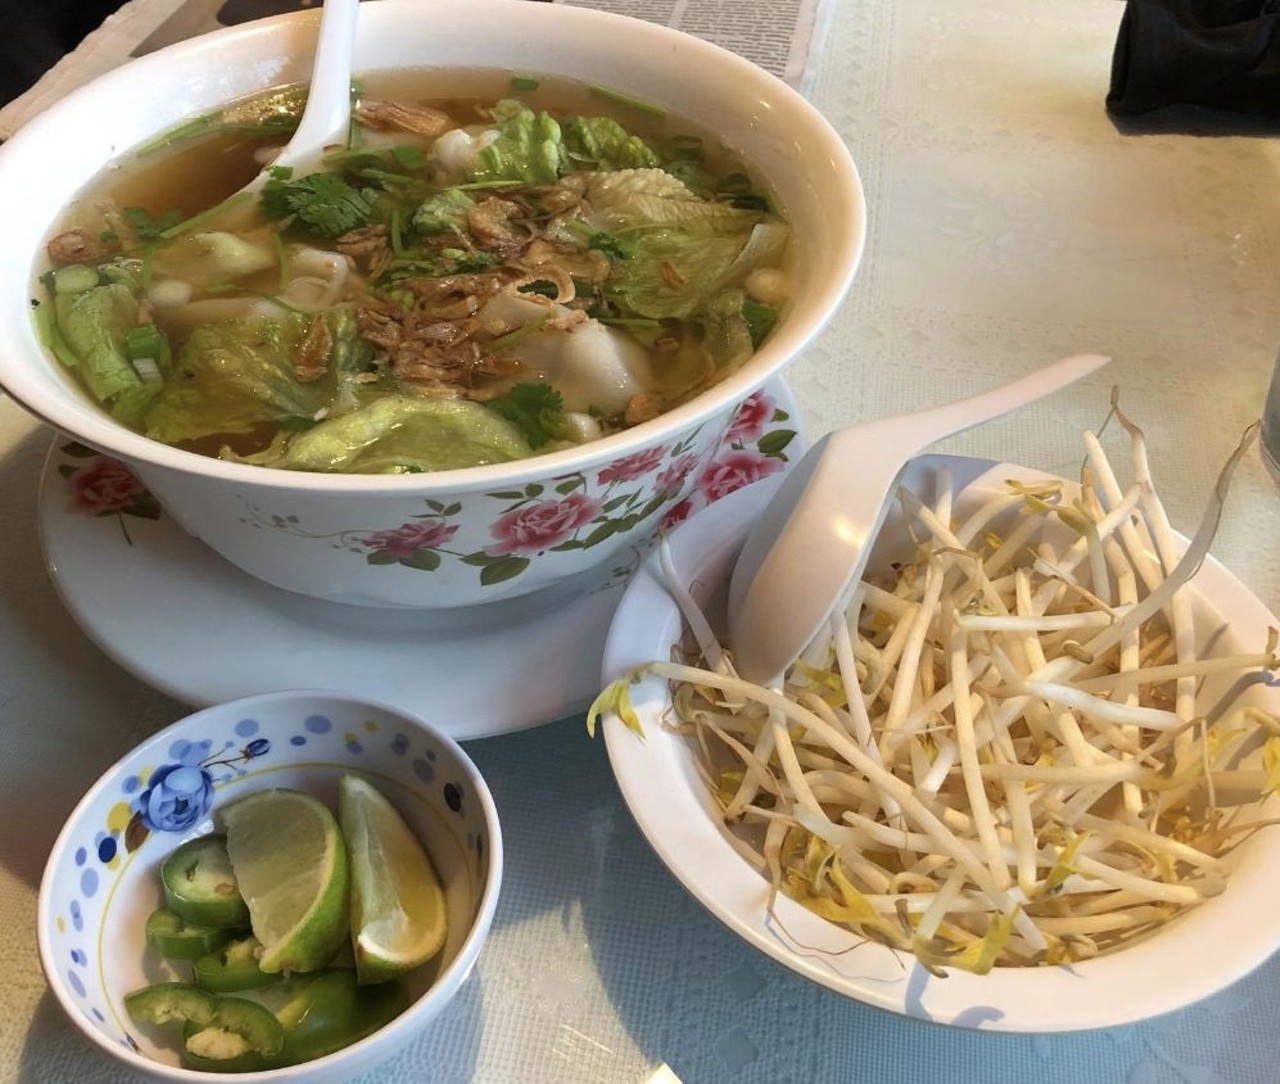  Minh Anh
5482 Detroit Rd., Cleveland
Small, casual and friendly, this family-owned Vietnamese restaurant serves cinnamon-scented pho, colossal cr&ecirc;pes and an assortment of tasty noodle bowls, along with plenty of vegetarian options. 
Photo via Minh Anh/Facebook